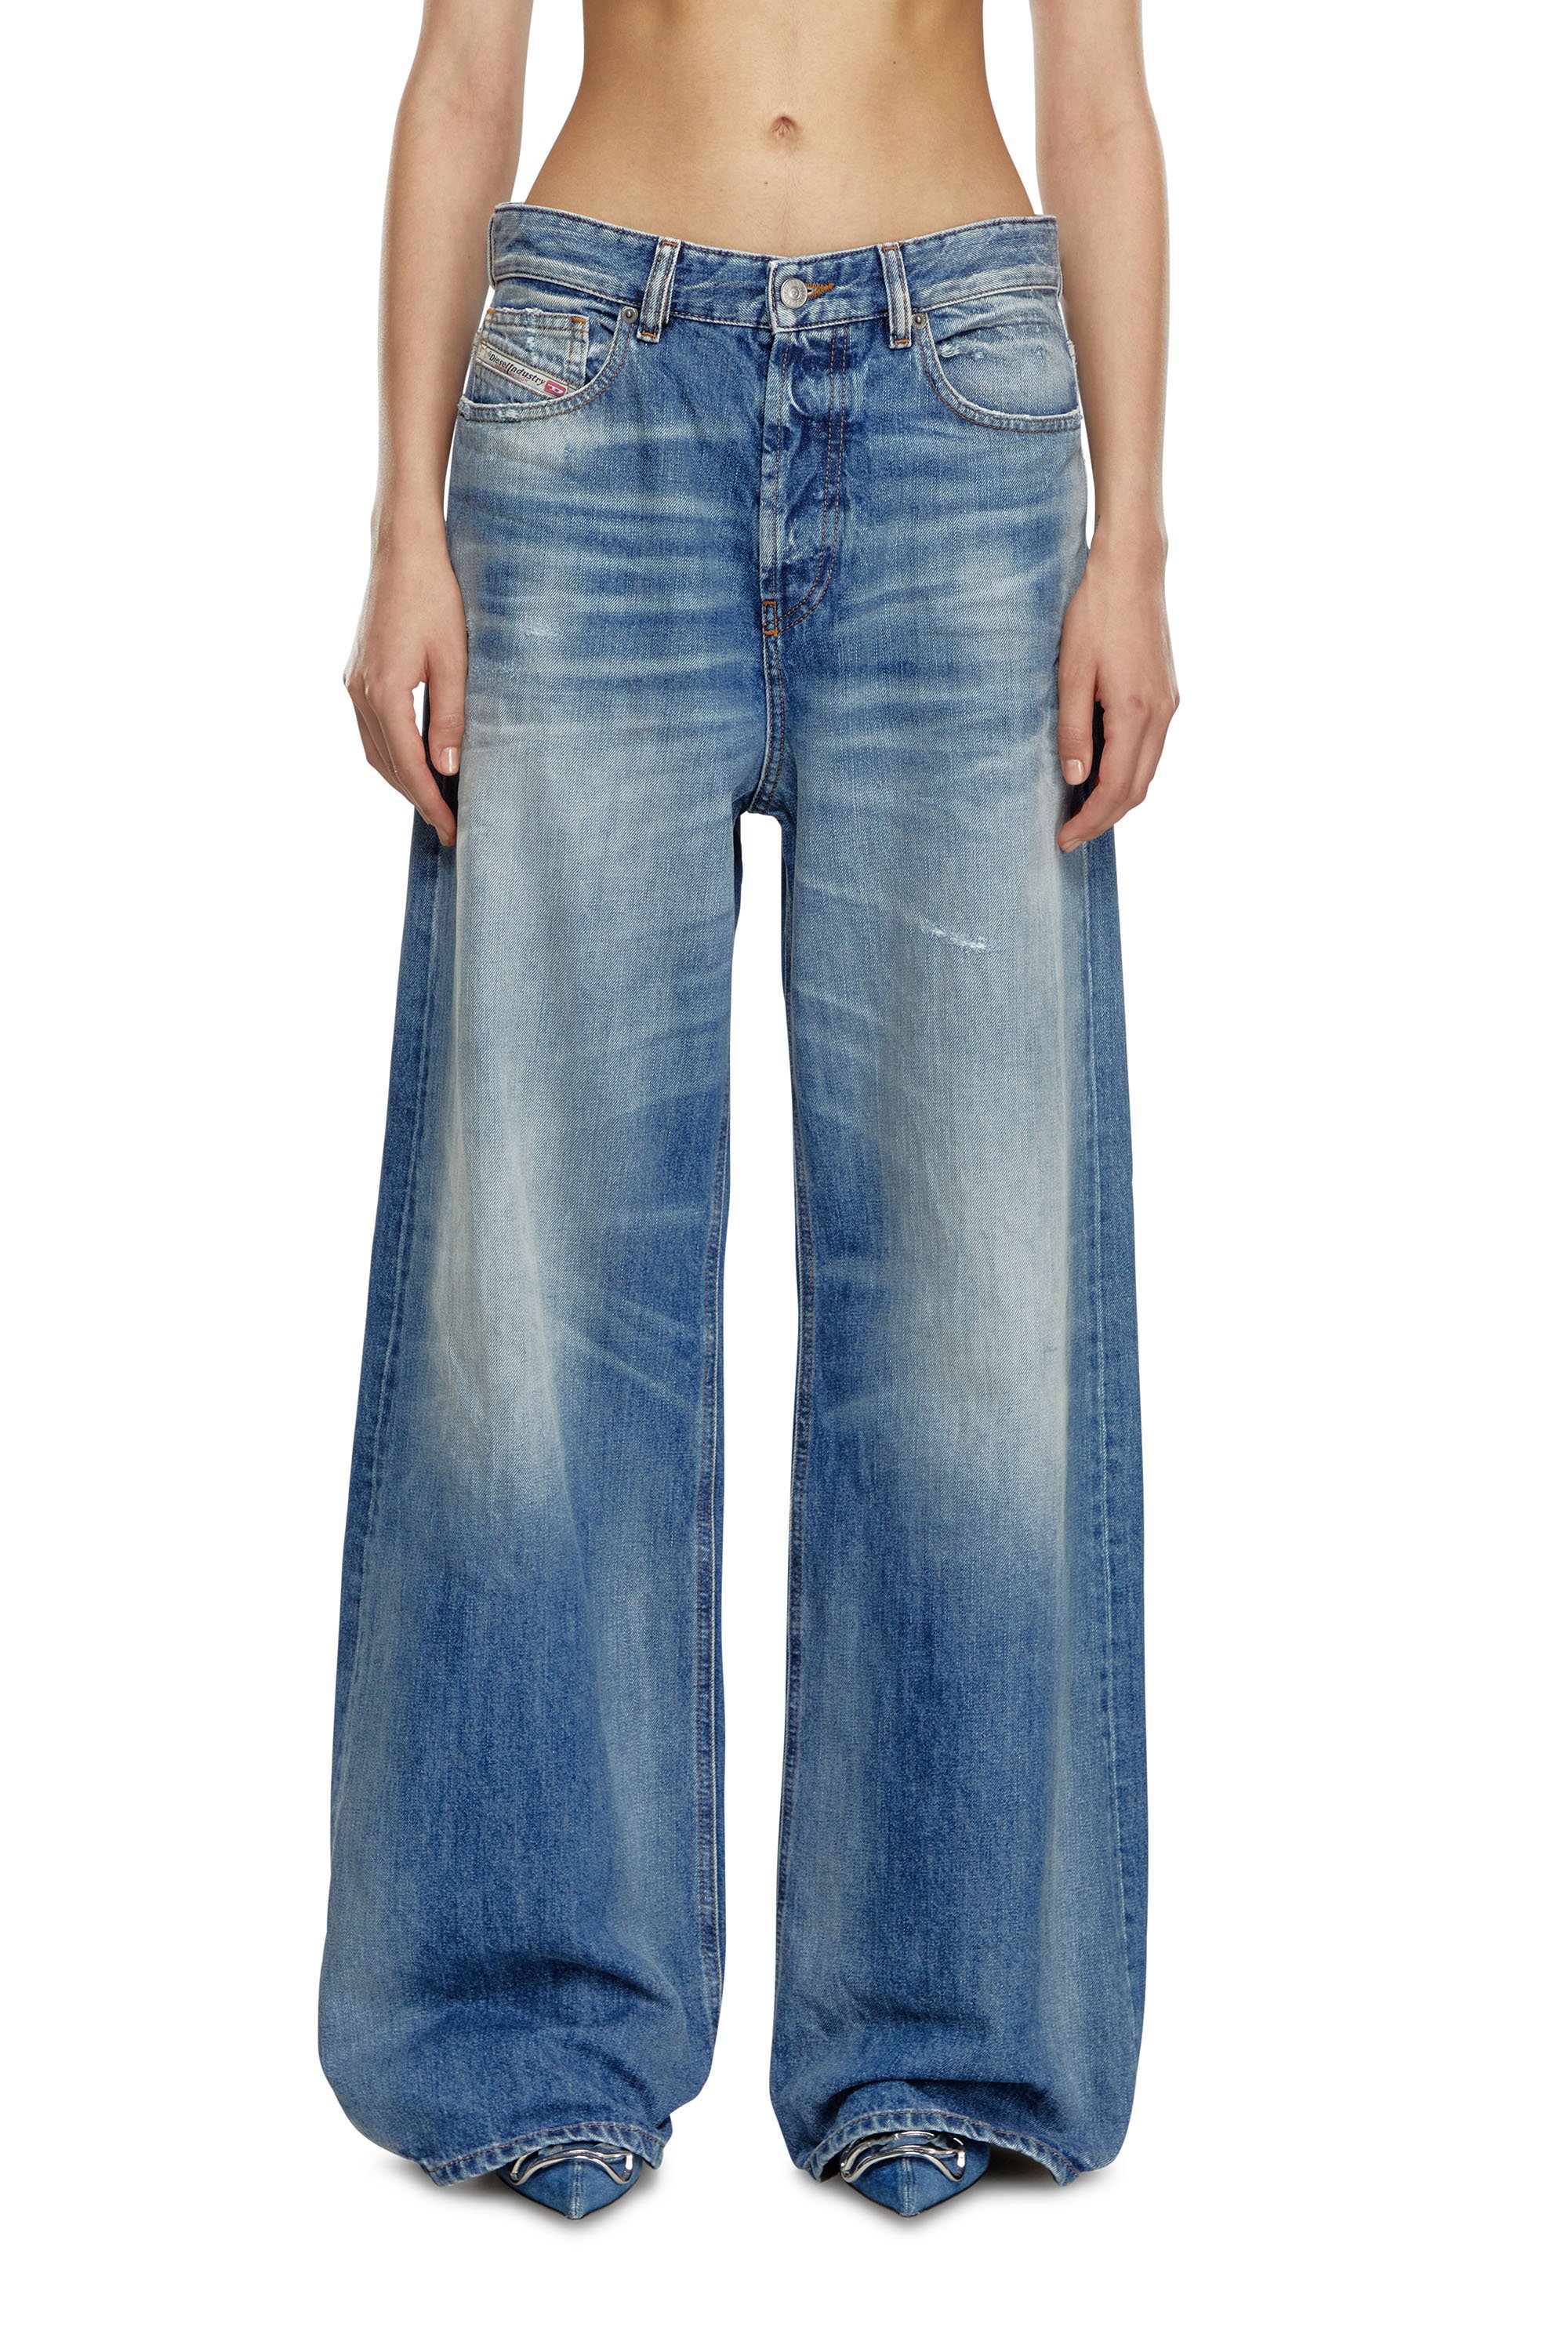 Diesel - Straight Jeans 1996 D-Sire 09J86, Mujer Straight Jeans - 1996 D-Sire in Azul marino - Image 1